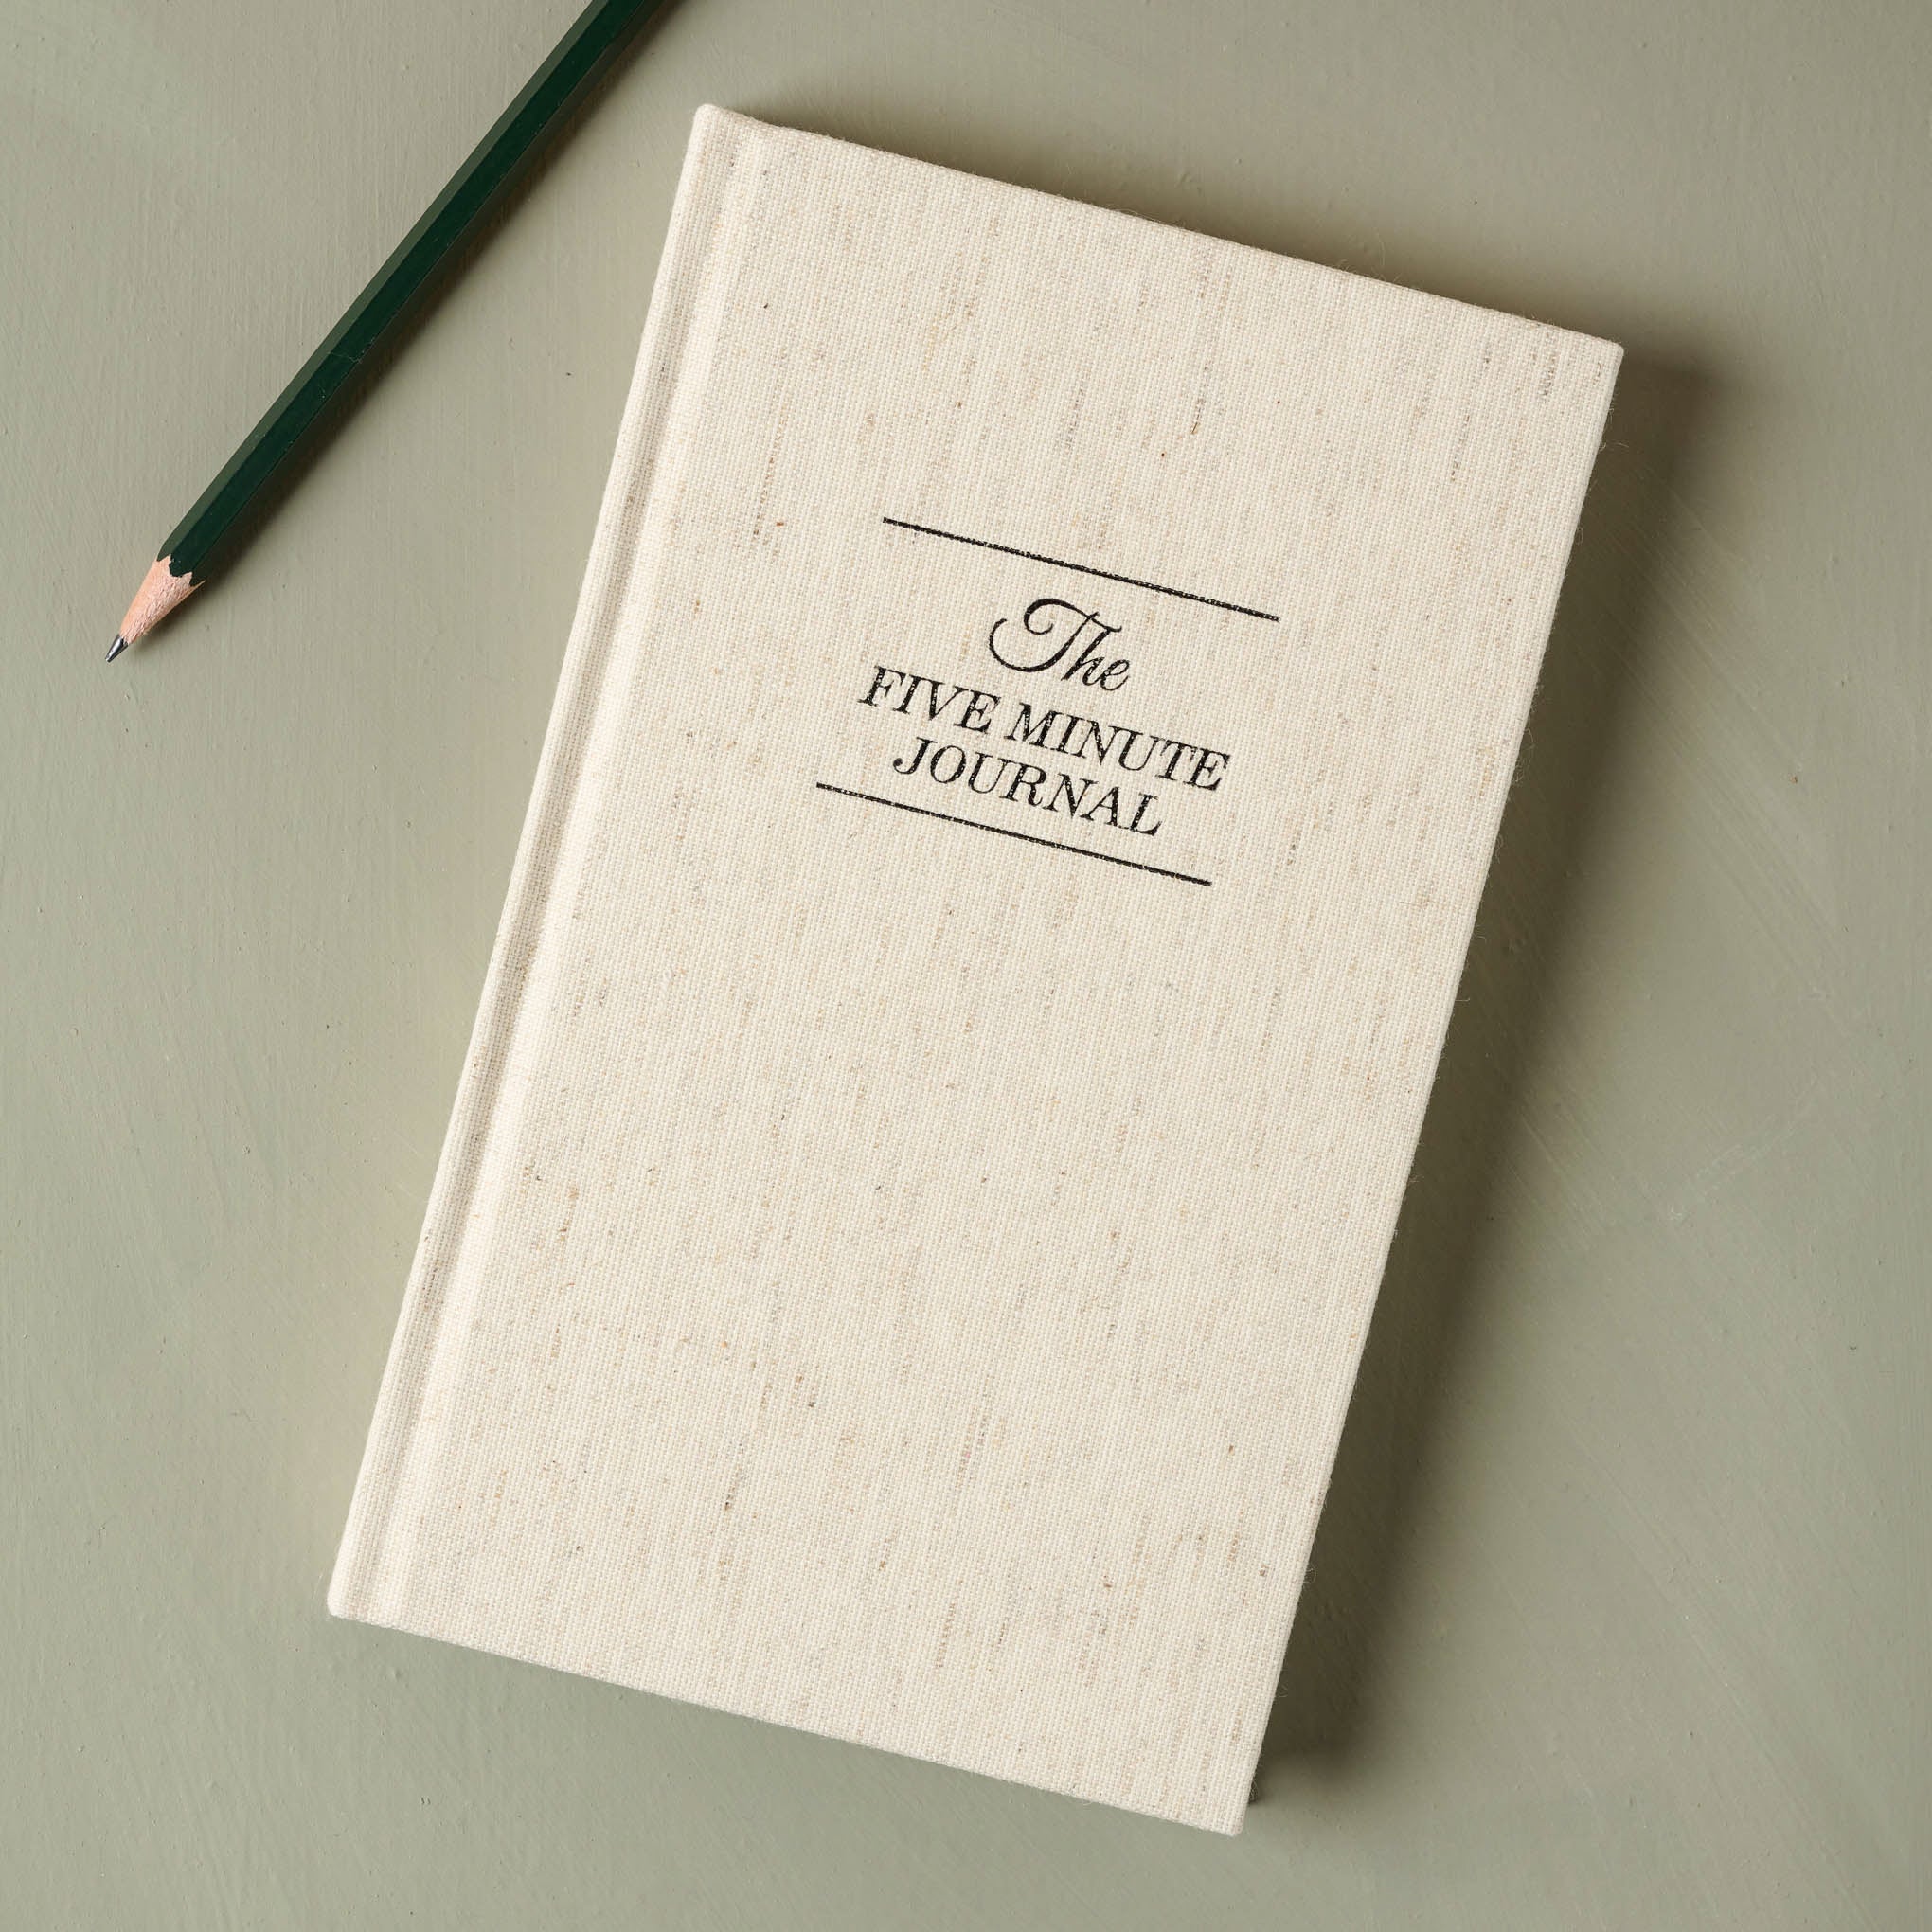 The Five Minute Journal$29.00